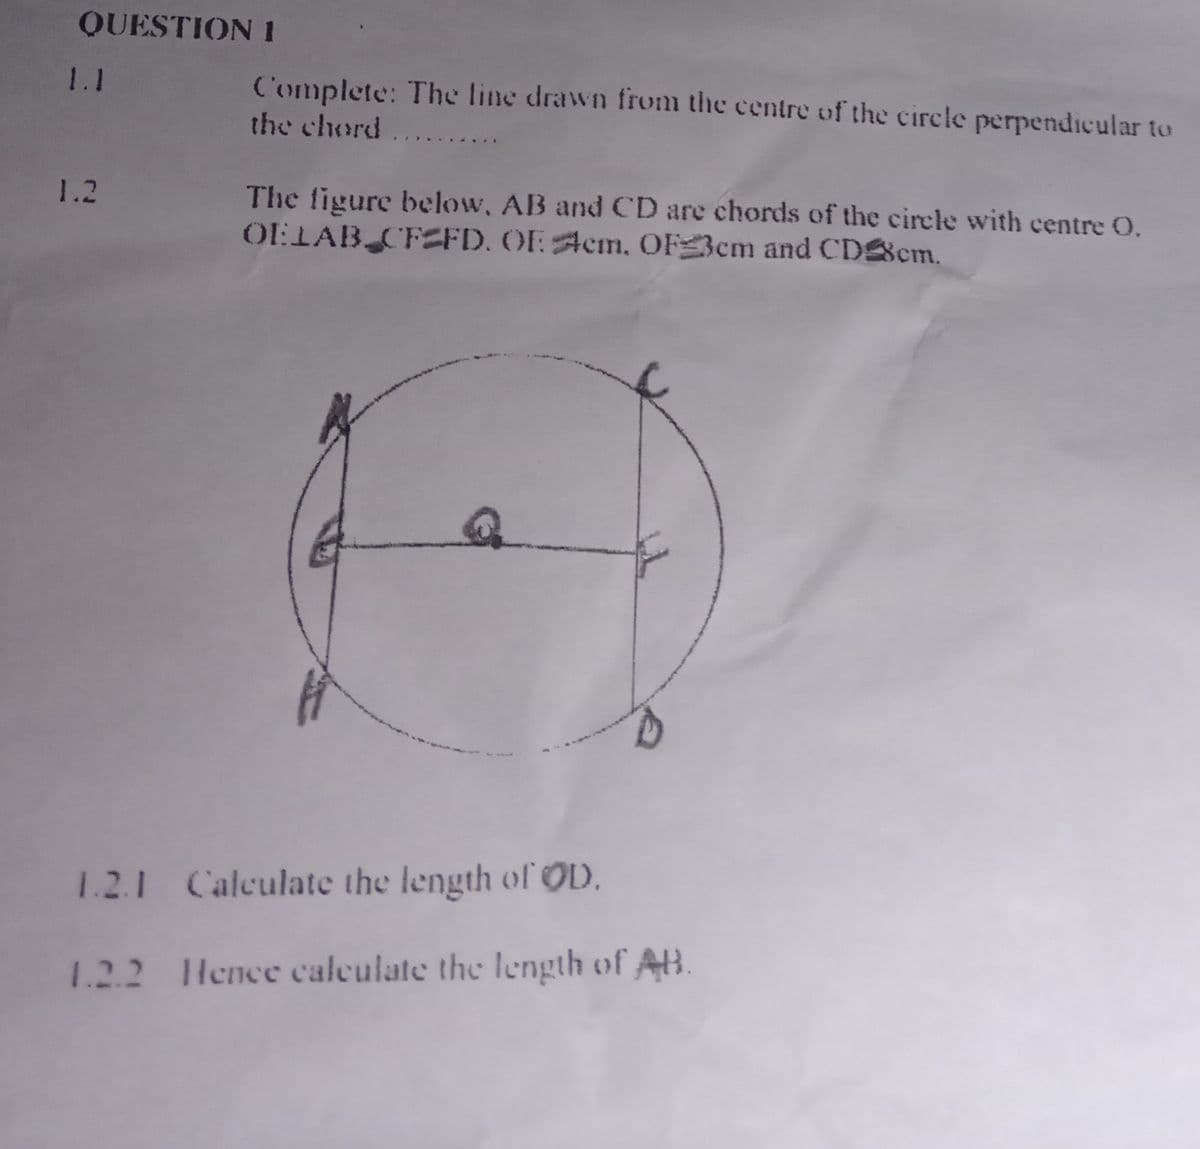 QUESTION 1
1.1
1.2
Complete: The line drawn from the centre of the circle perpendicular to
the chord....
The figure below, AB and CD are chords of the circle with centre O.
OELAB CFEFD. OF Acm, OF 3cm and CD8cm.
1.2.1 Calculate the length of OD.
1.2.2 Hence calculate the length of AB.